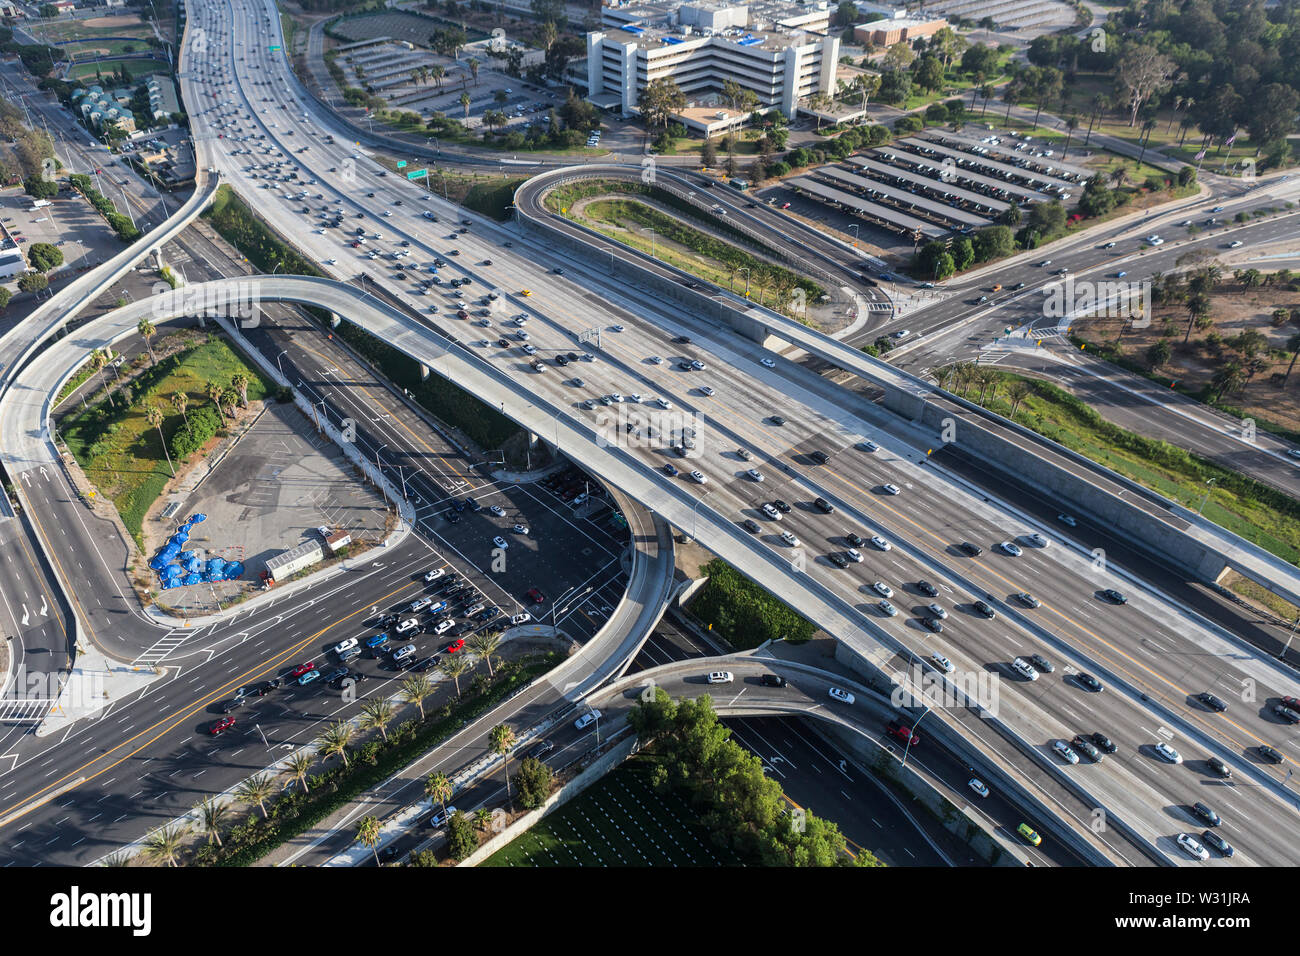 Aerial view of cars, ramps and buildings near the San Diego 405 Freeway at Wilshire Bl in Los Angeles, California. Stock Photo